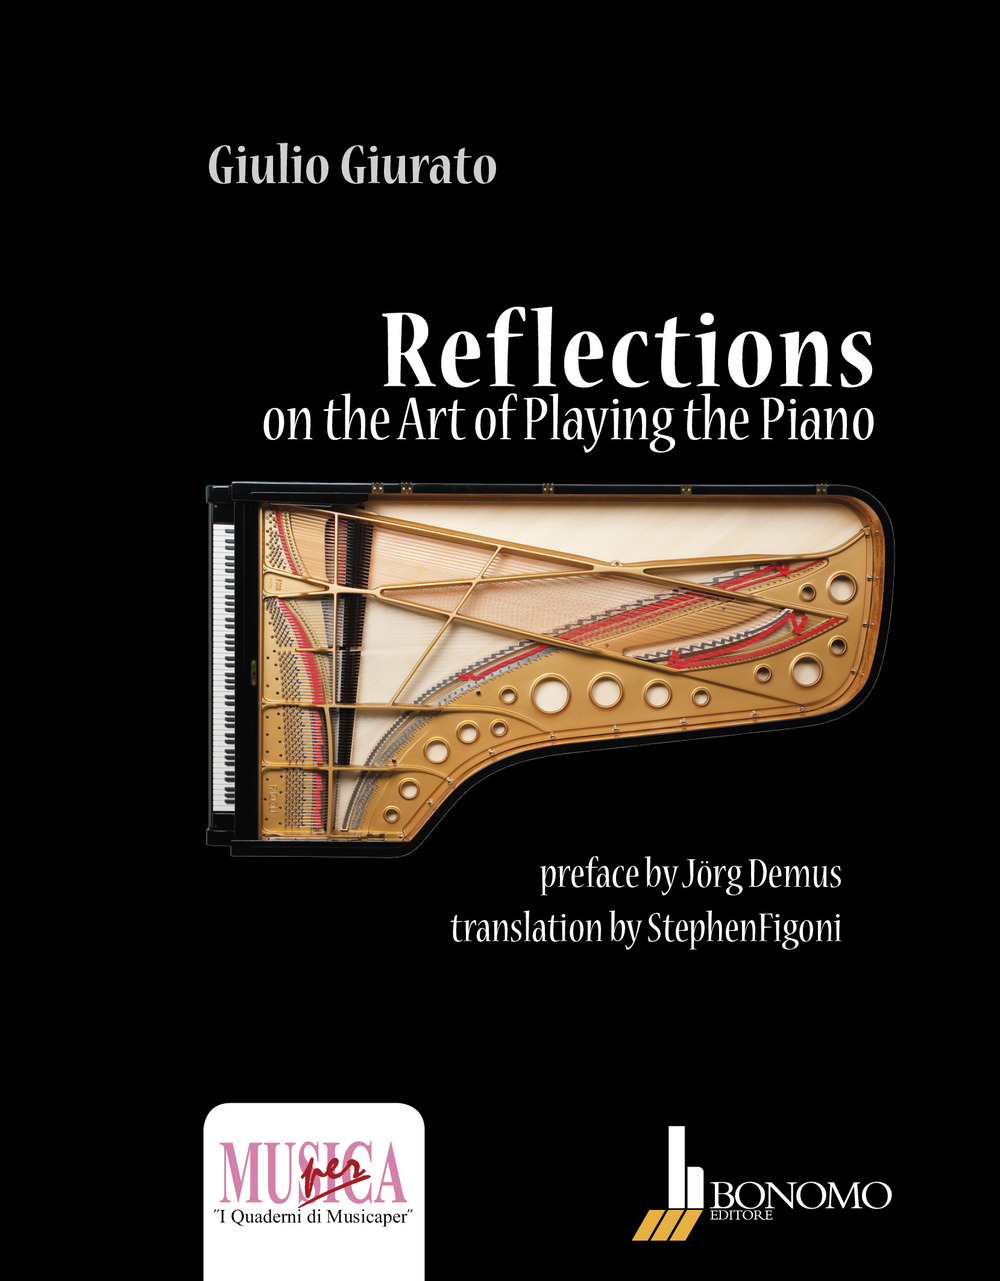 Reflections on the art of playing the piano